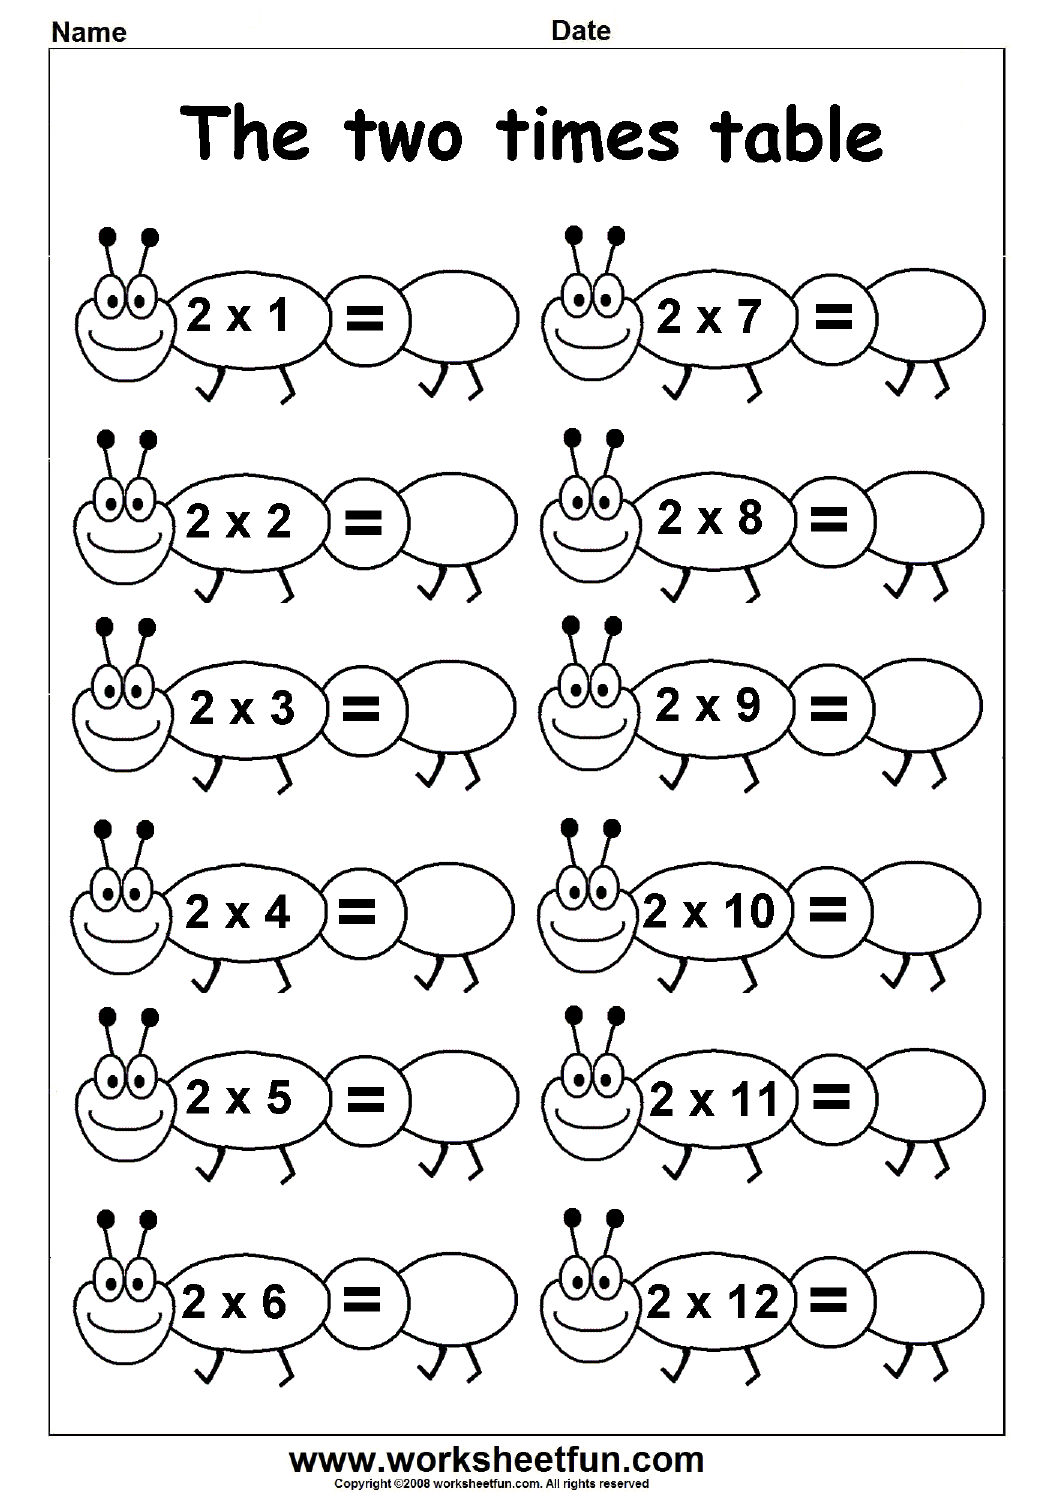 Multiplication Times Tables Worksheets – 5, 5, 5, 5, 5 & 5 Times In 2 Times Table Worksheet